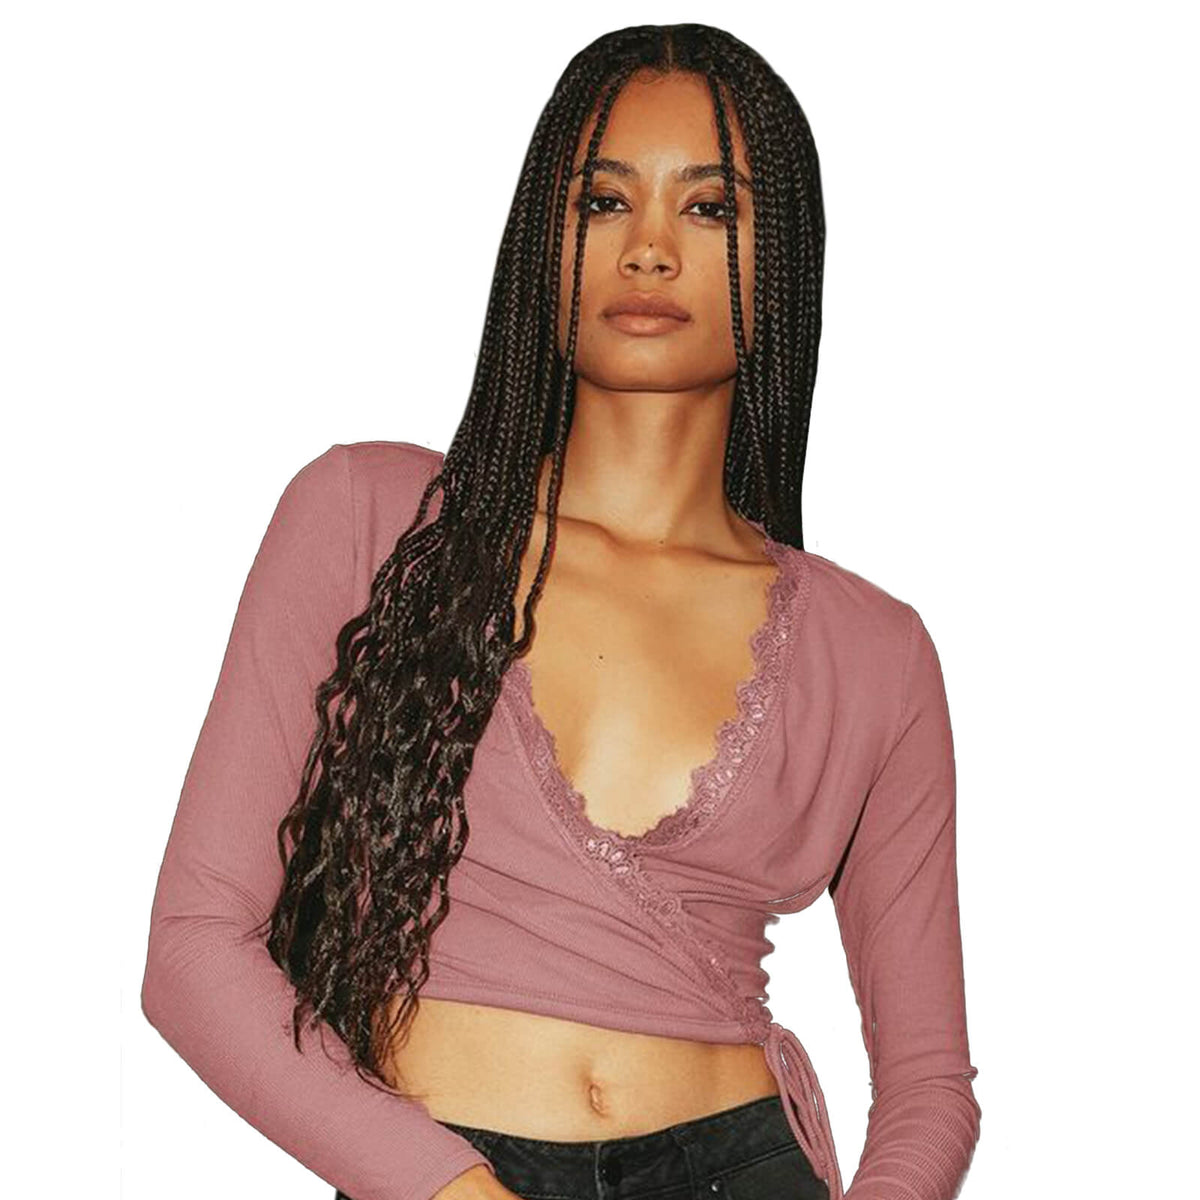 Box Braided Wig with Goddess Curly Ends Black Color